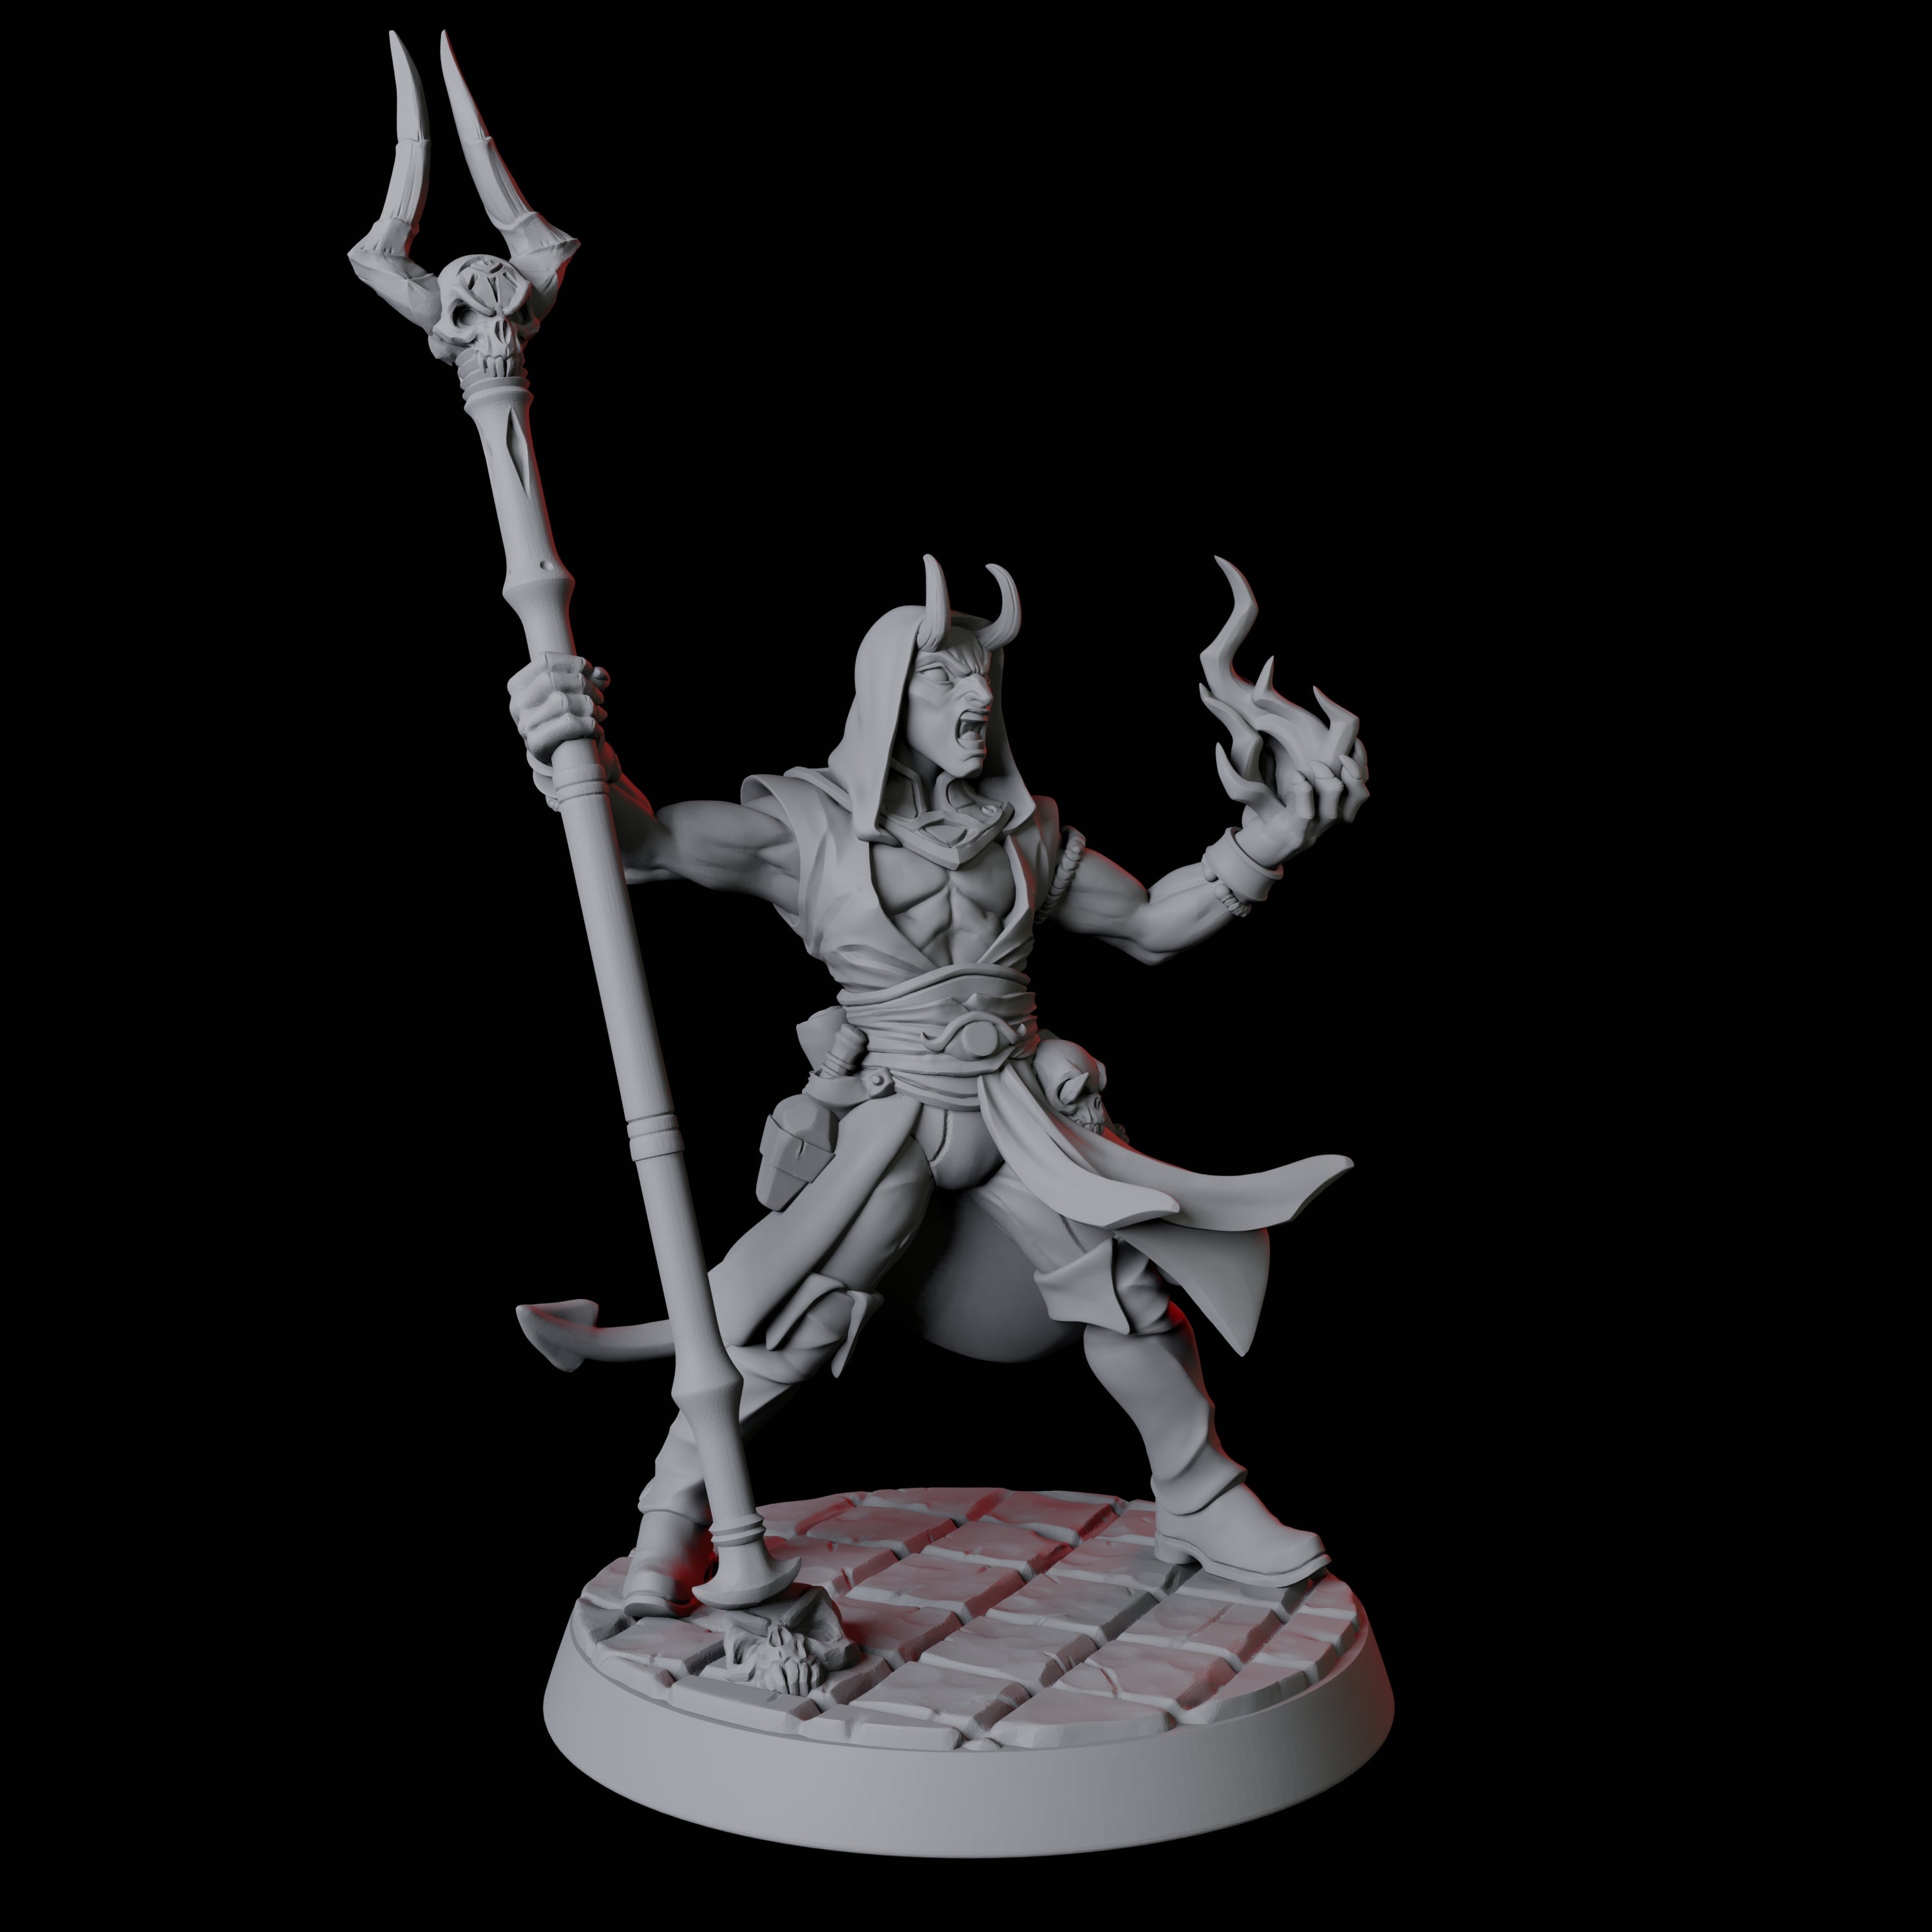 Six Tiefling Trickster Fighters Miniature for Dungeons and Dragons, Pathfinder or other TTRPGs